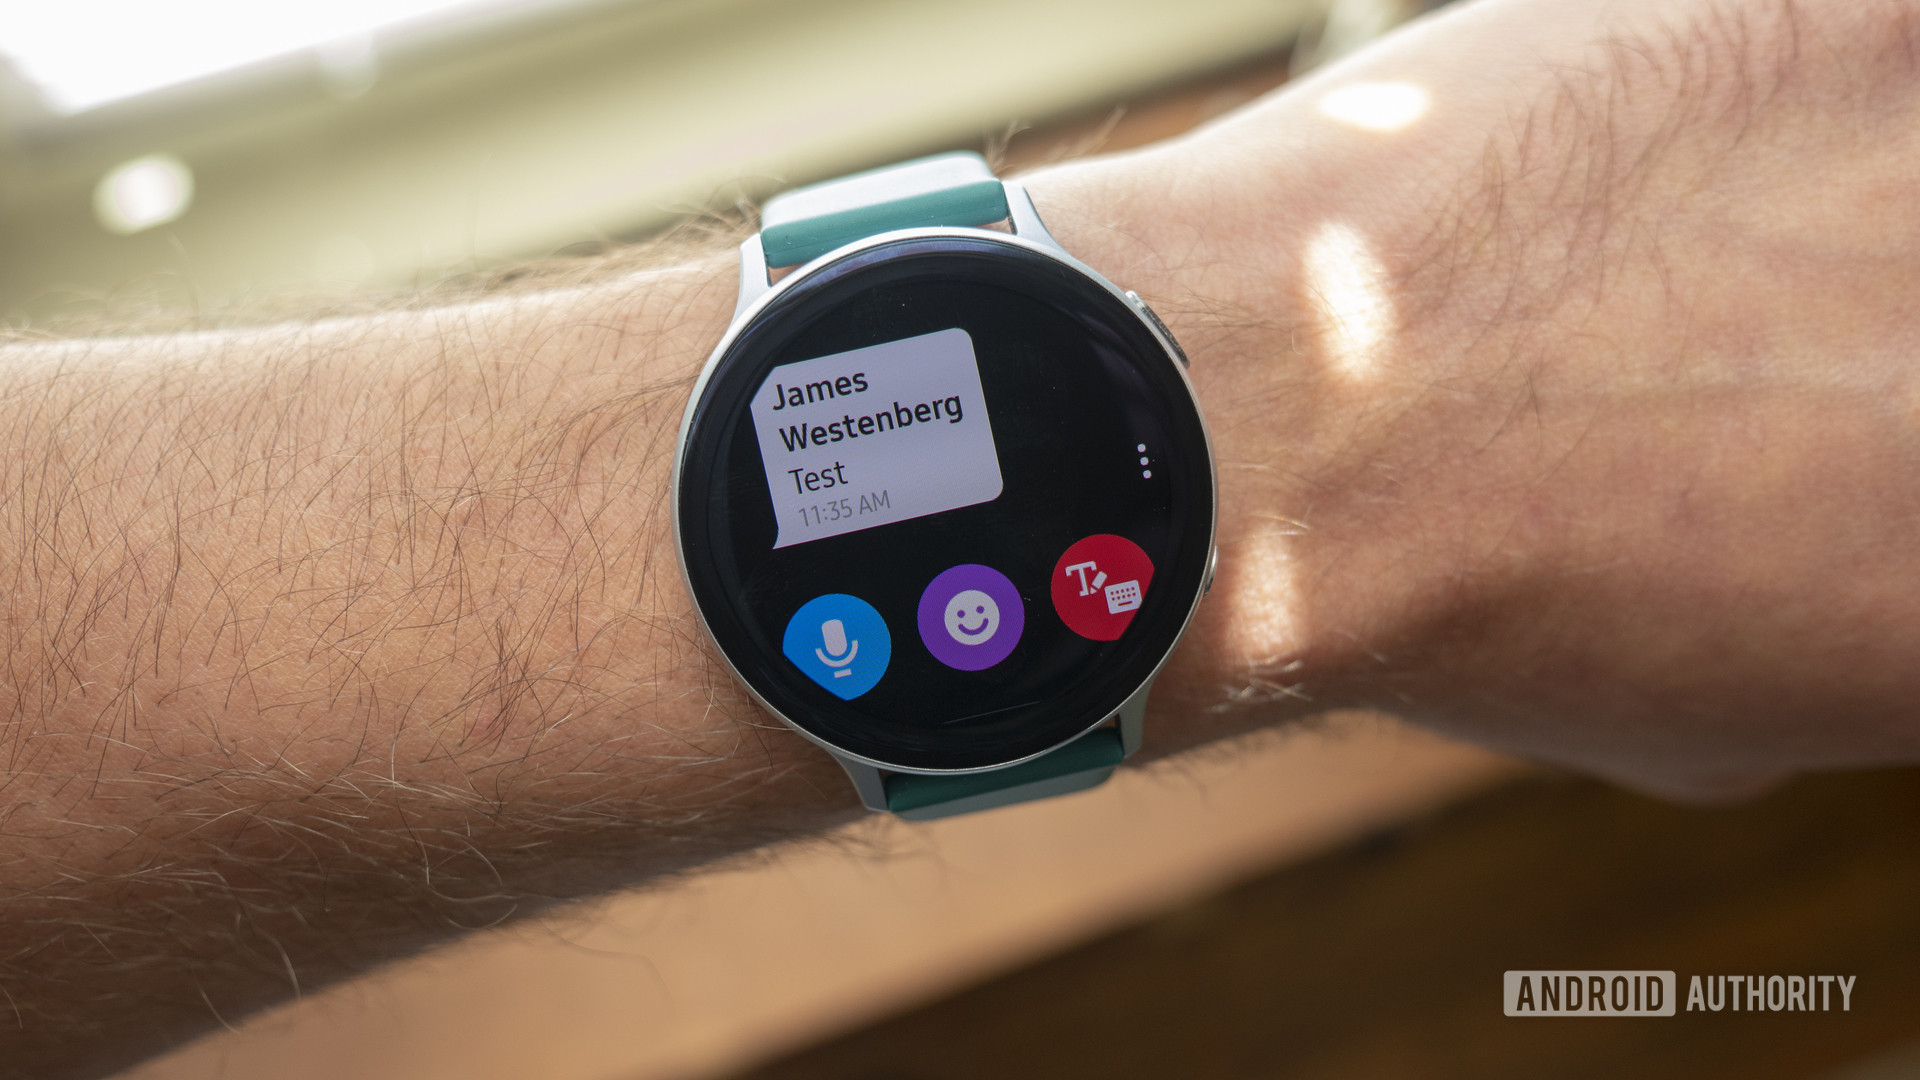 A Samsung Galaxy Watch Active 2 displays a user's text notification.